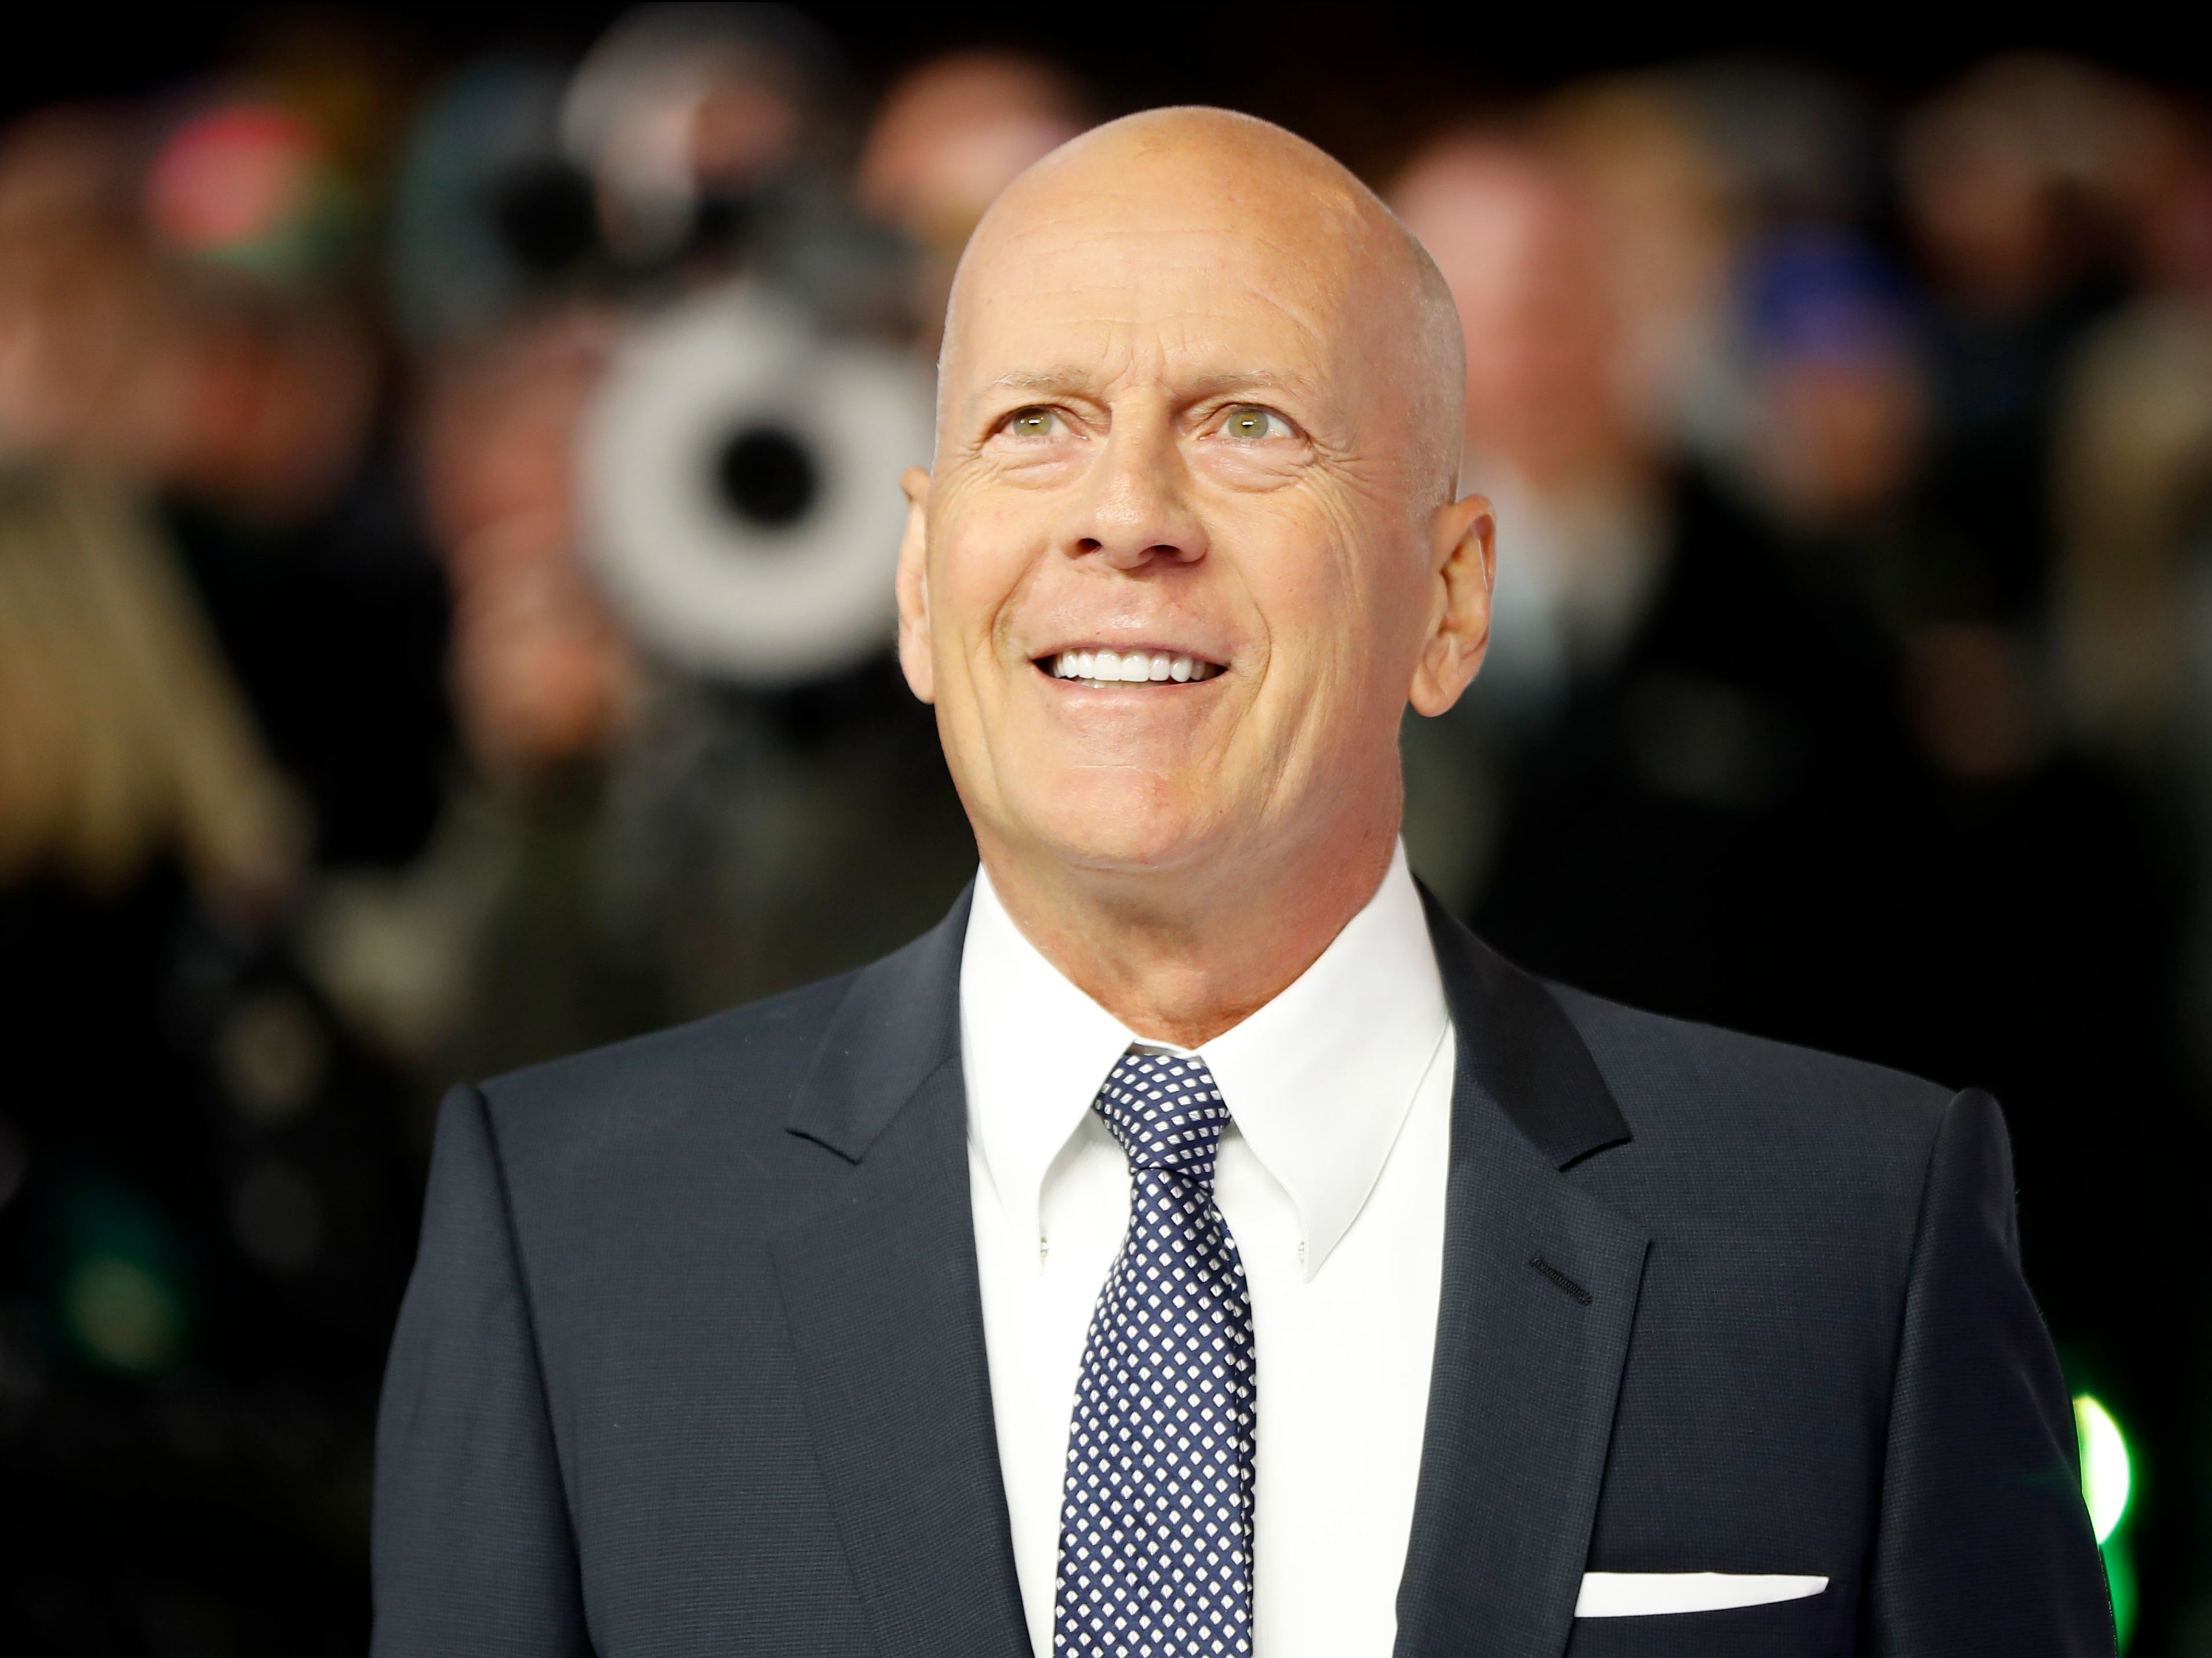 Bruce Willis announced his retirement from acting last week